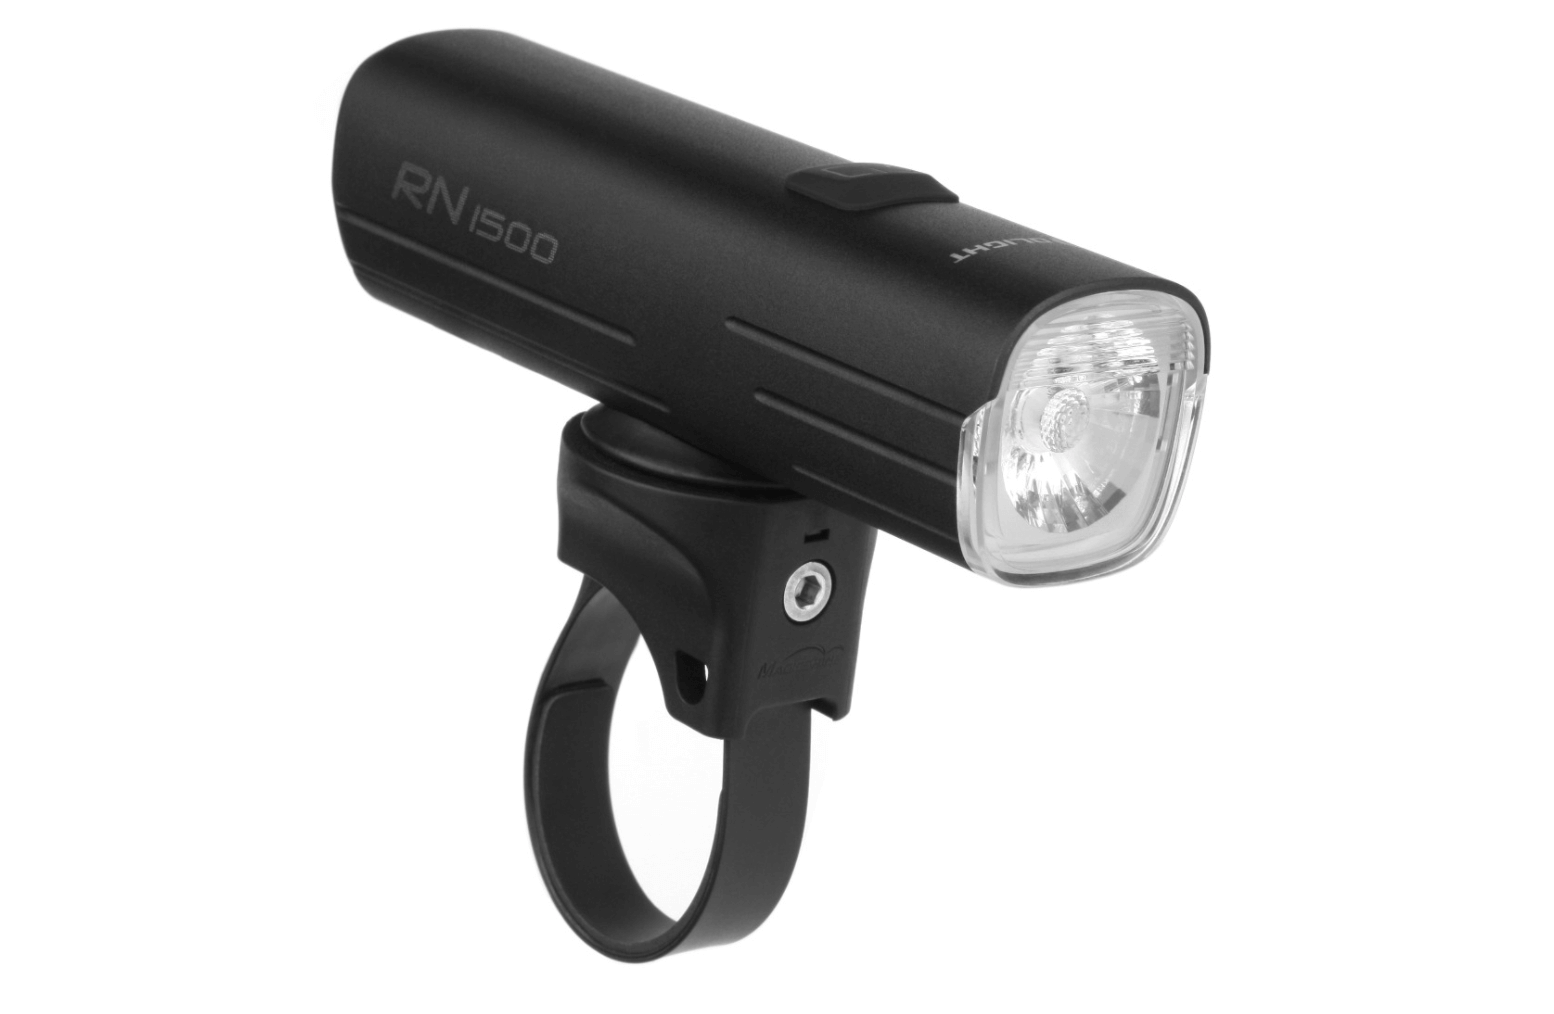 Cycle Light Sets - Olight RN1500 And SEEMEE 30 Review - RN1500 angle